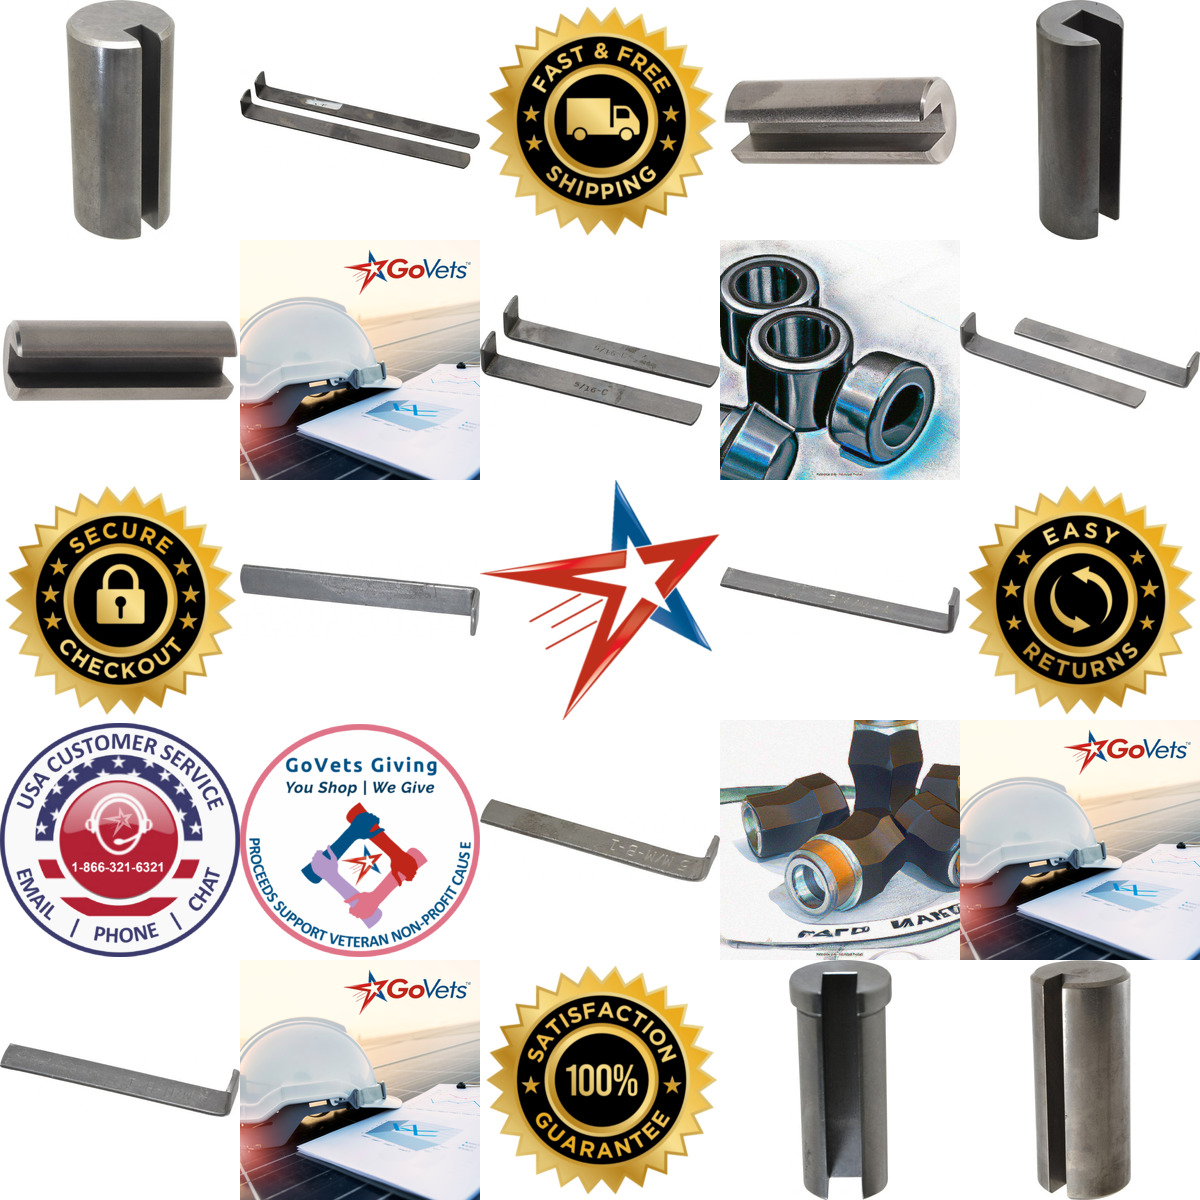 A selection of Broach Hardware products on GoVets